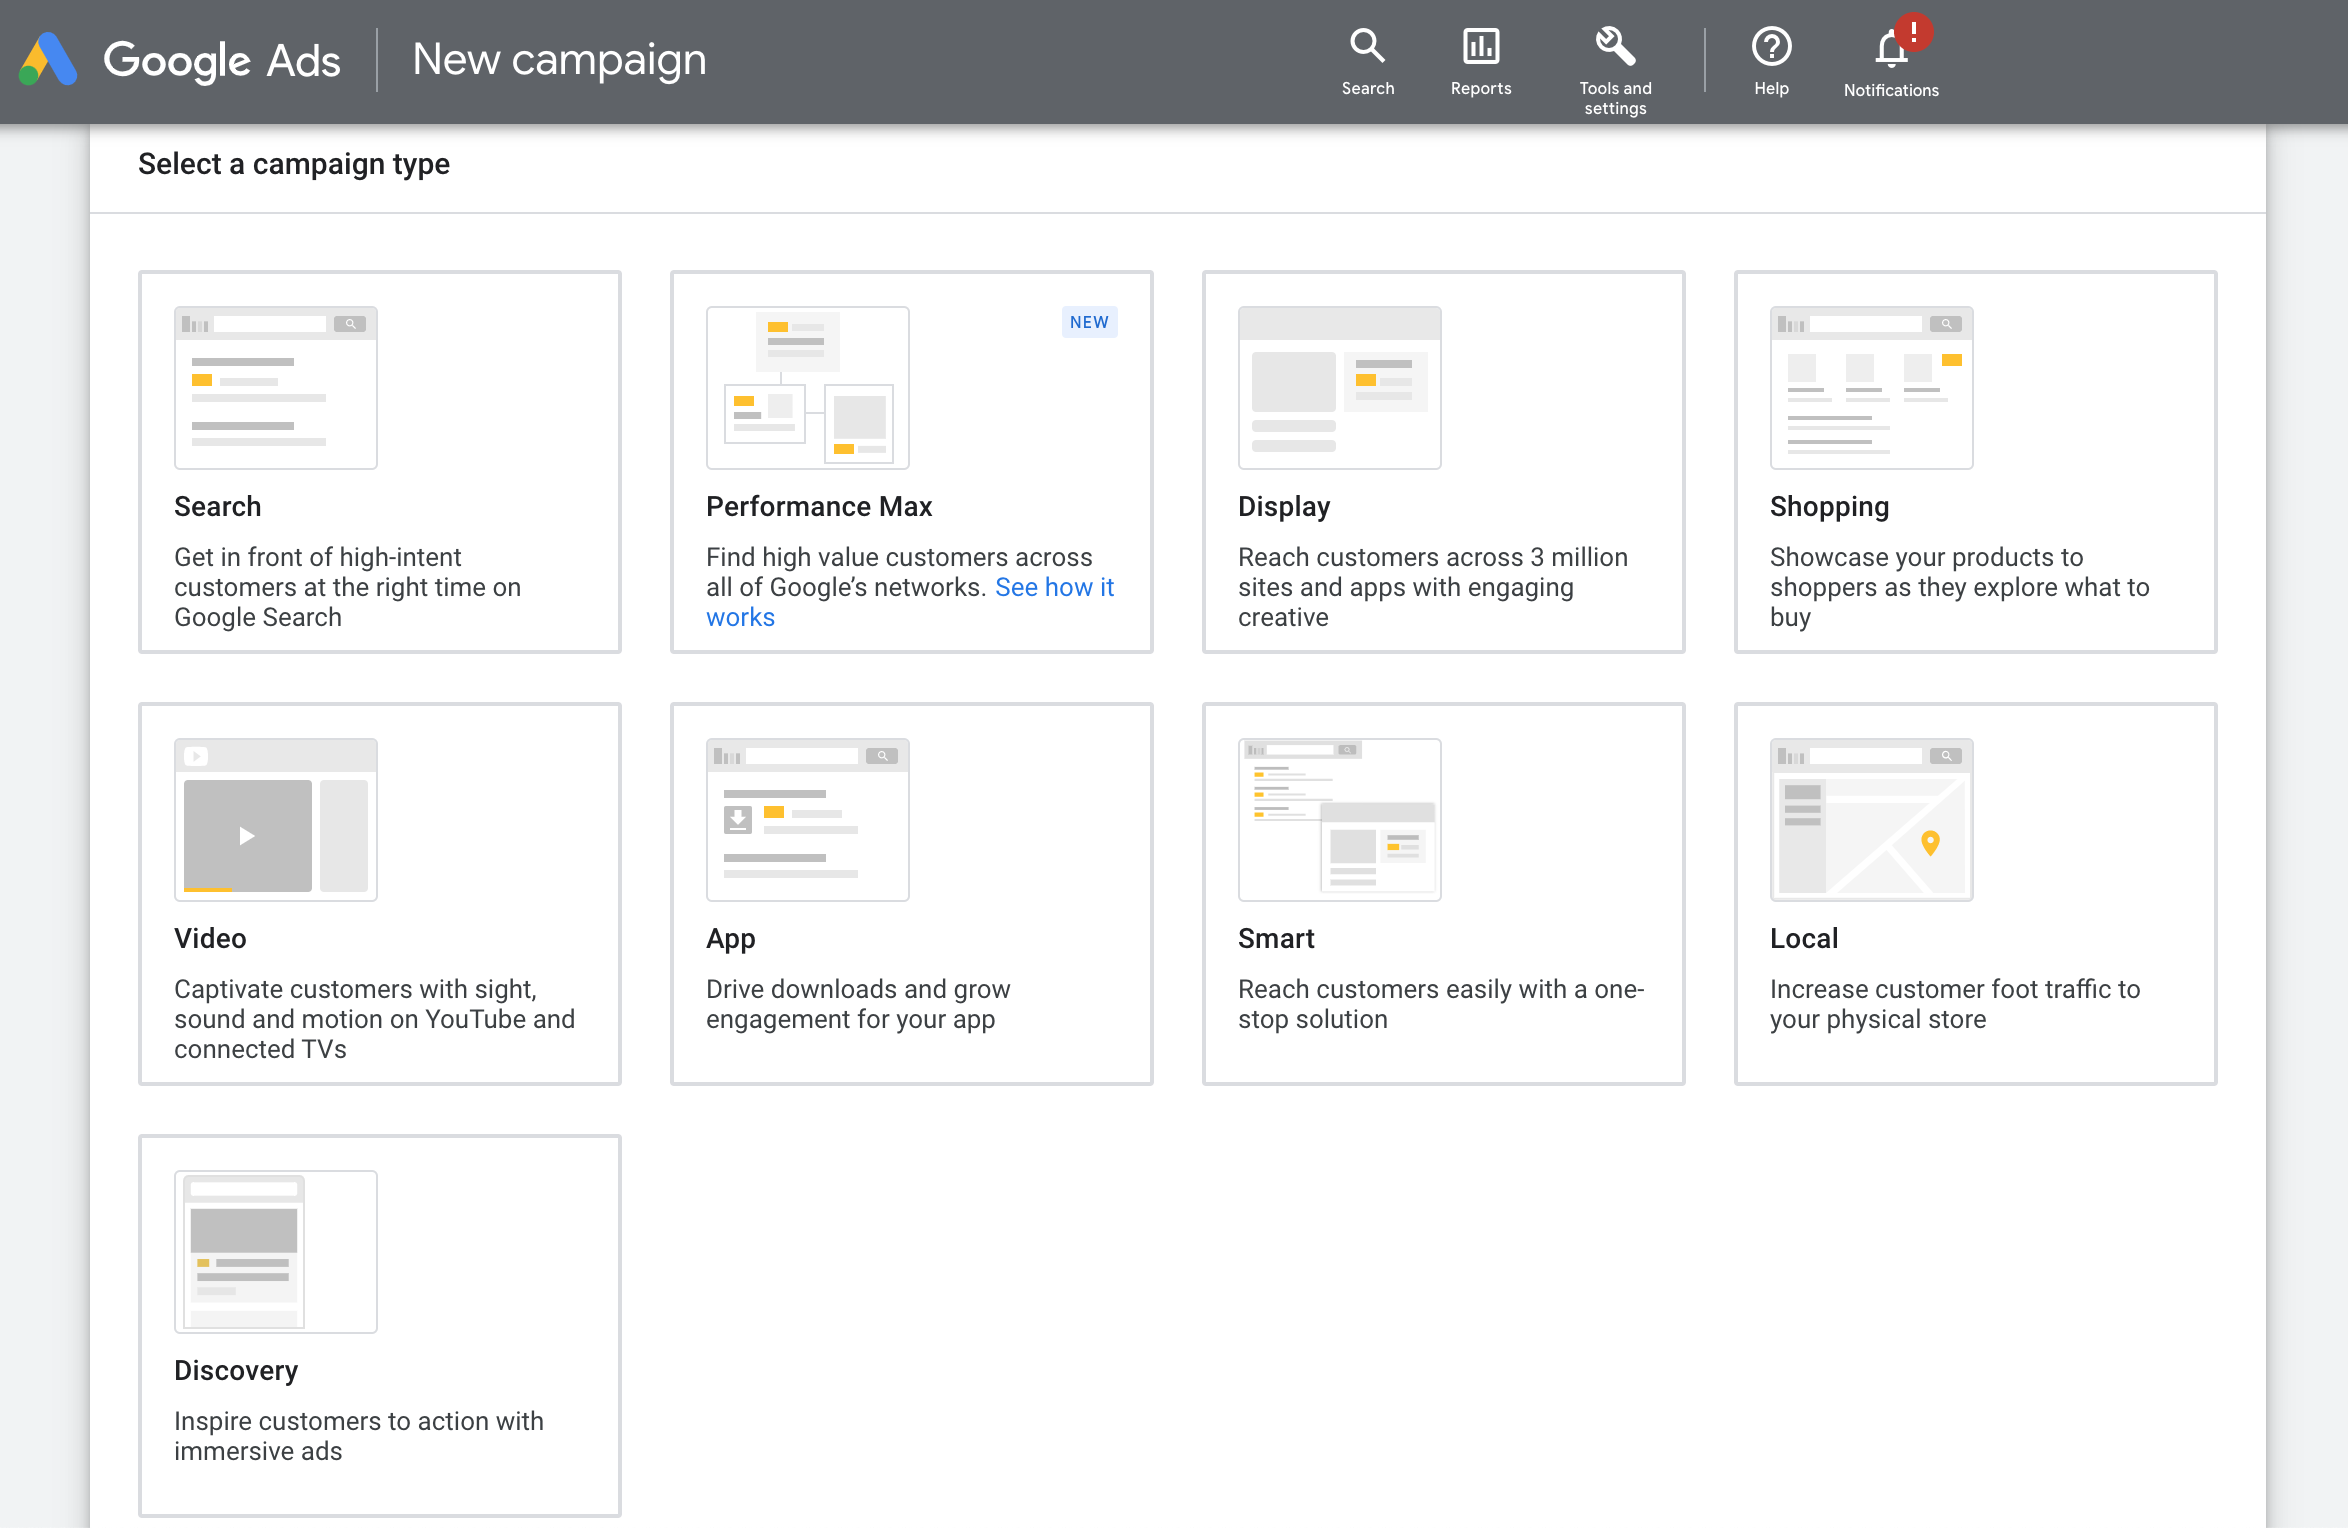 Google Ads campaign types available in the platform